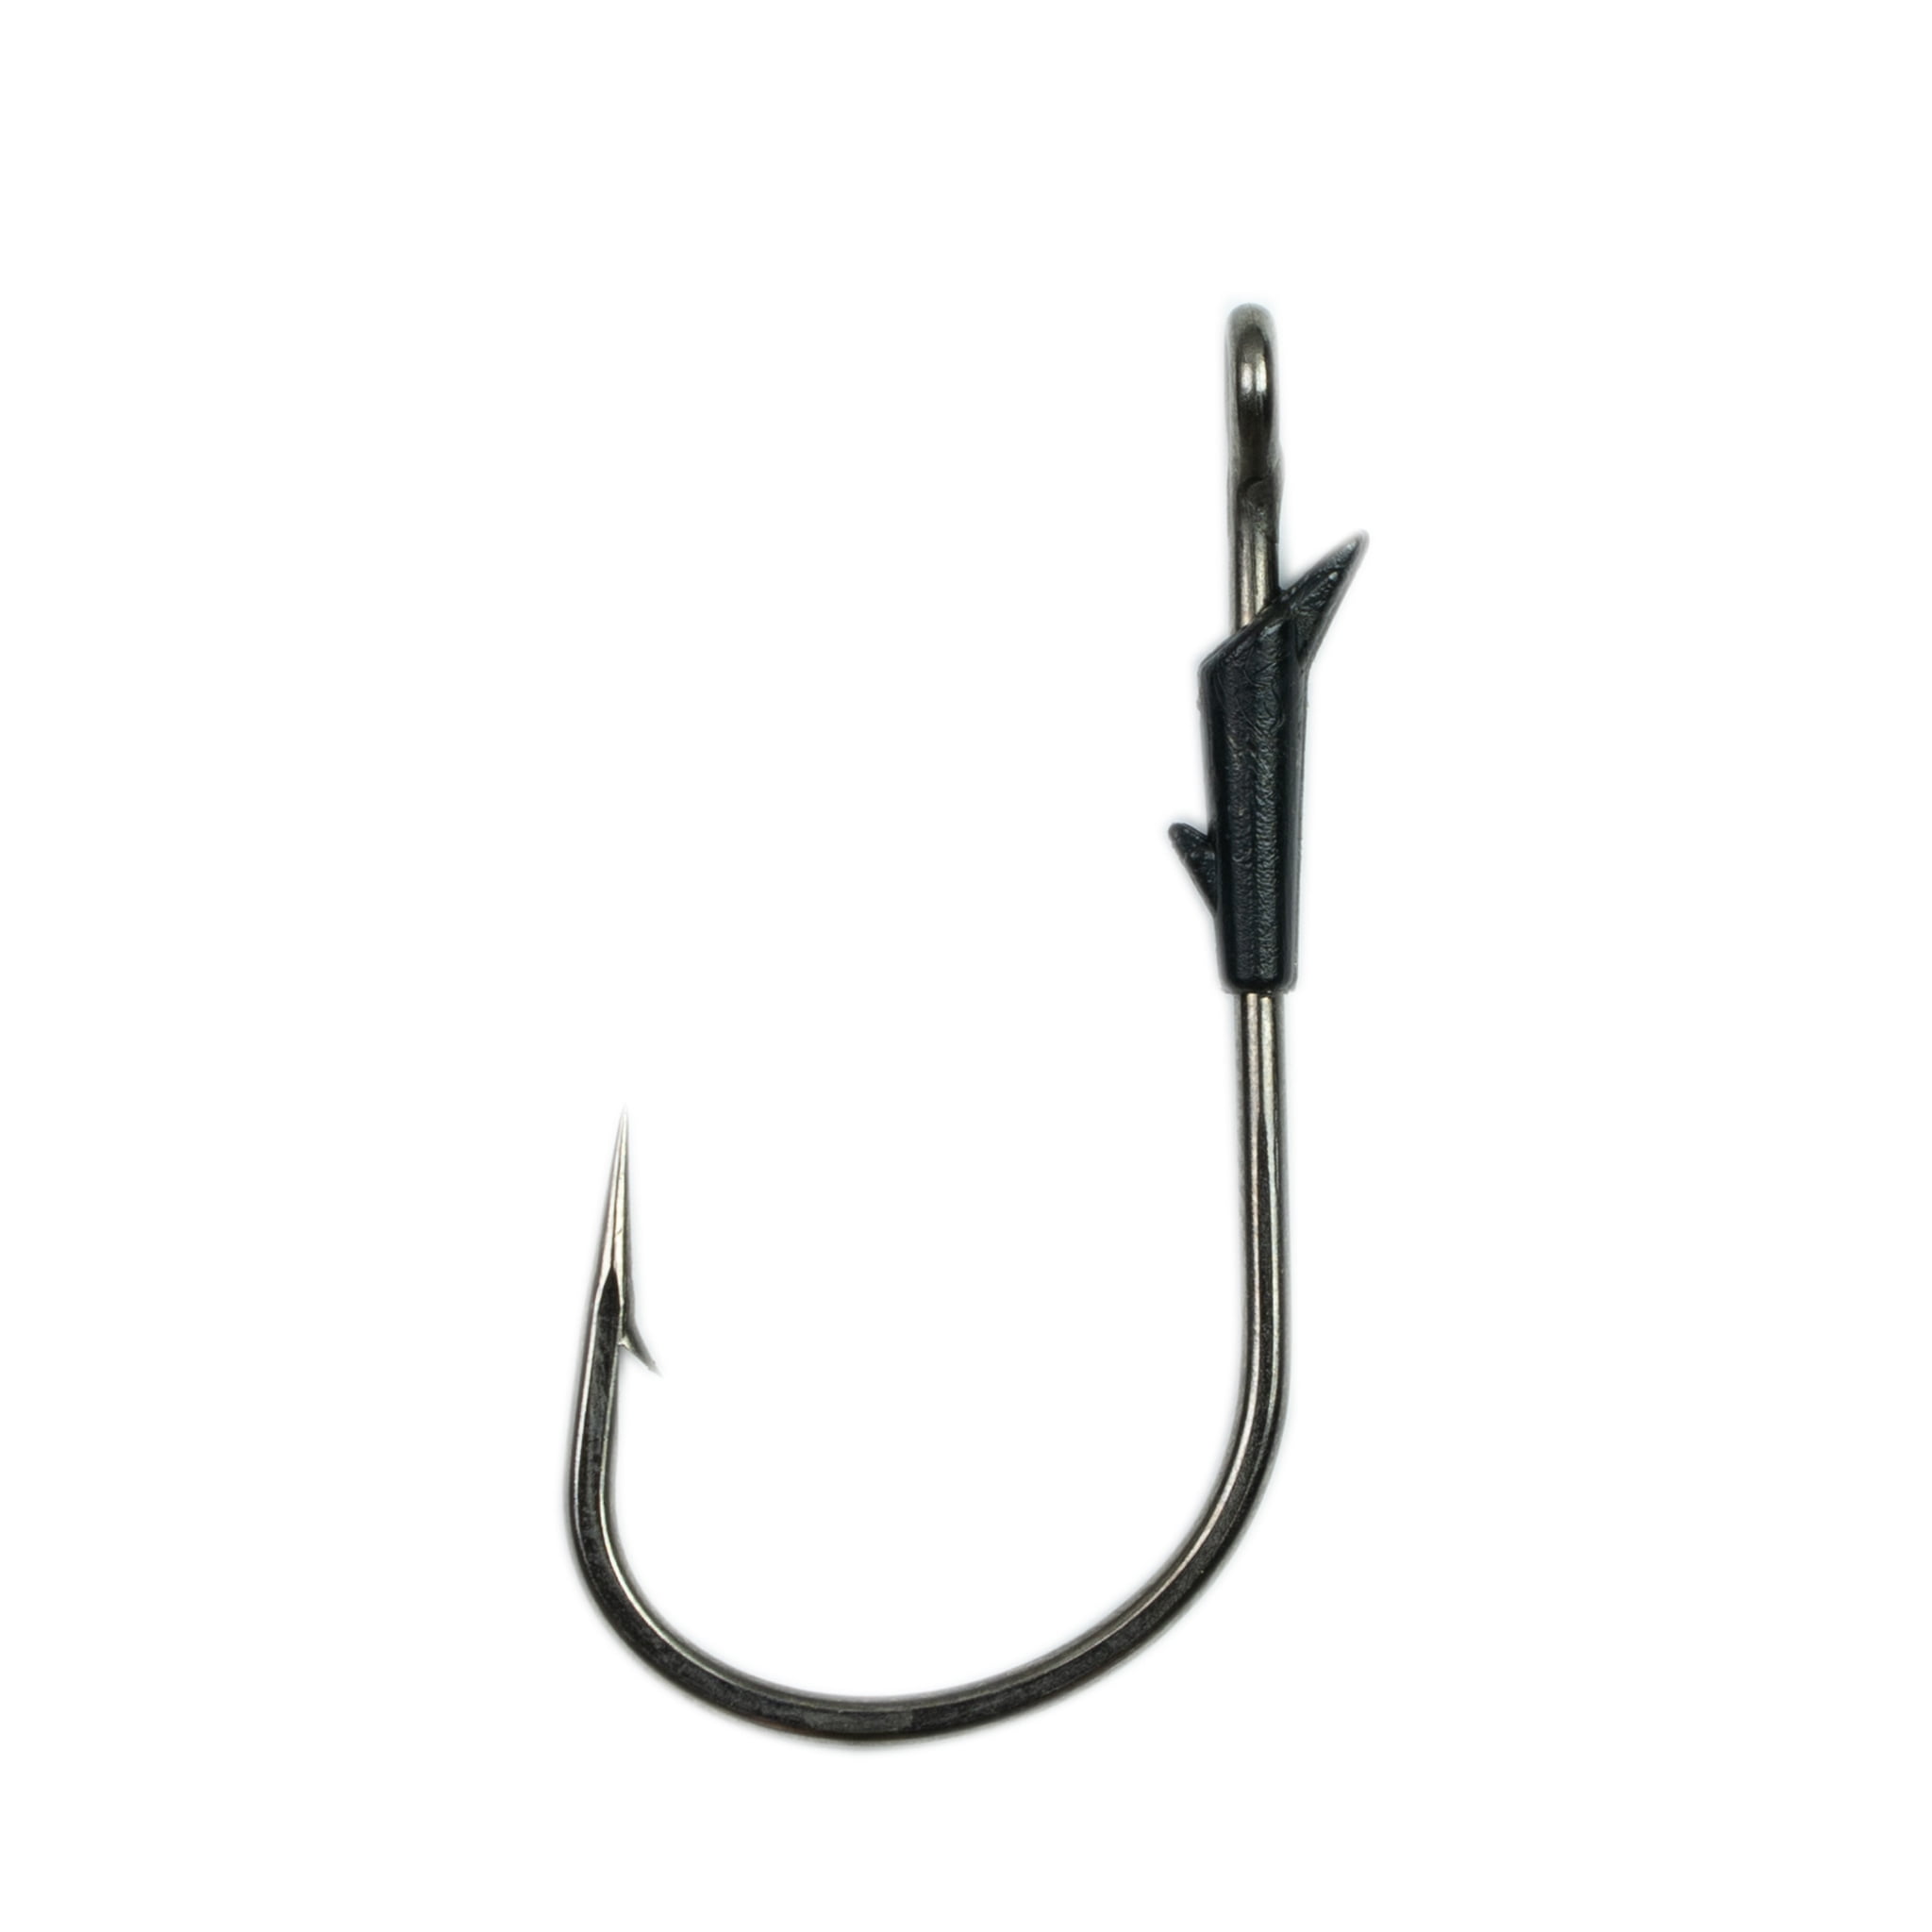  Dyxssm Small Fishing Hooks with Line, Tiny Fishing Hook on  Nylon Line (Pack of 20) (6#) : Sports & Outdoors